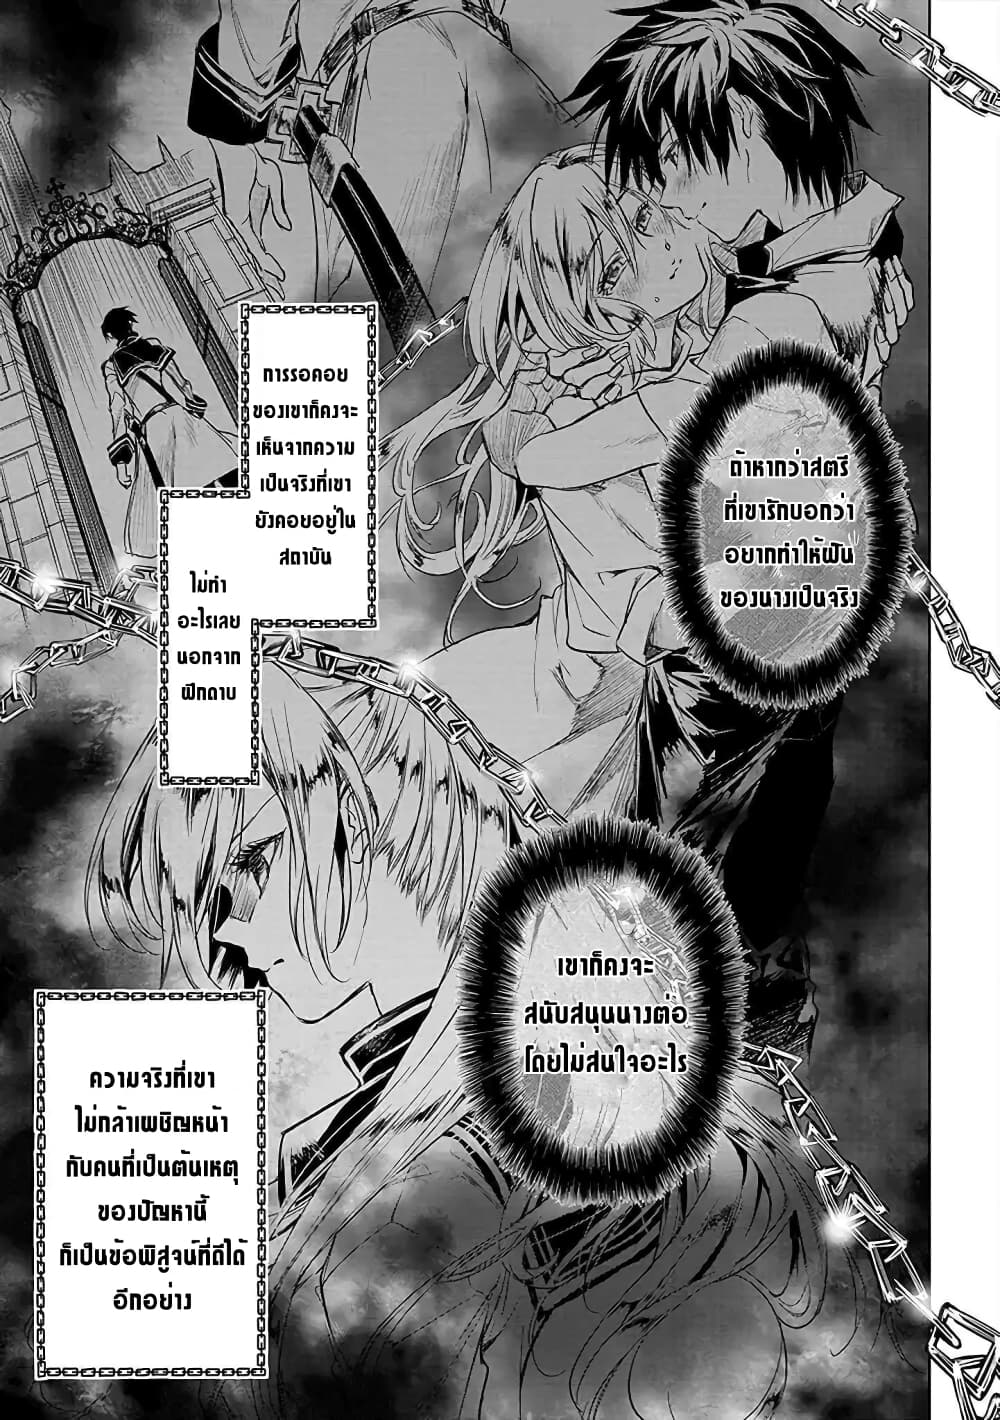 Ori of the Dragon Chain Heart in the Mind 9 (17)